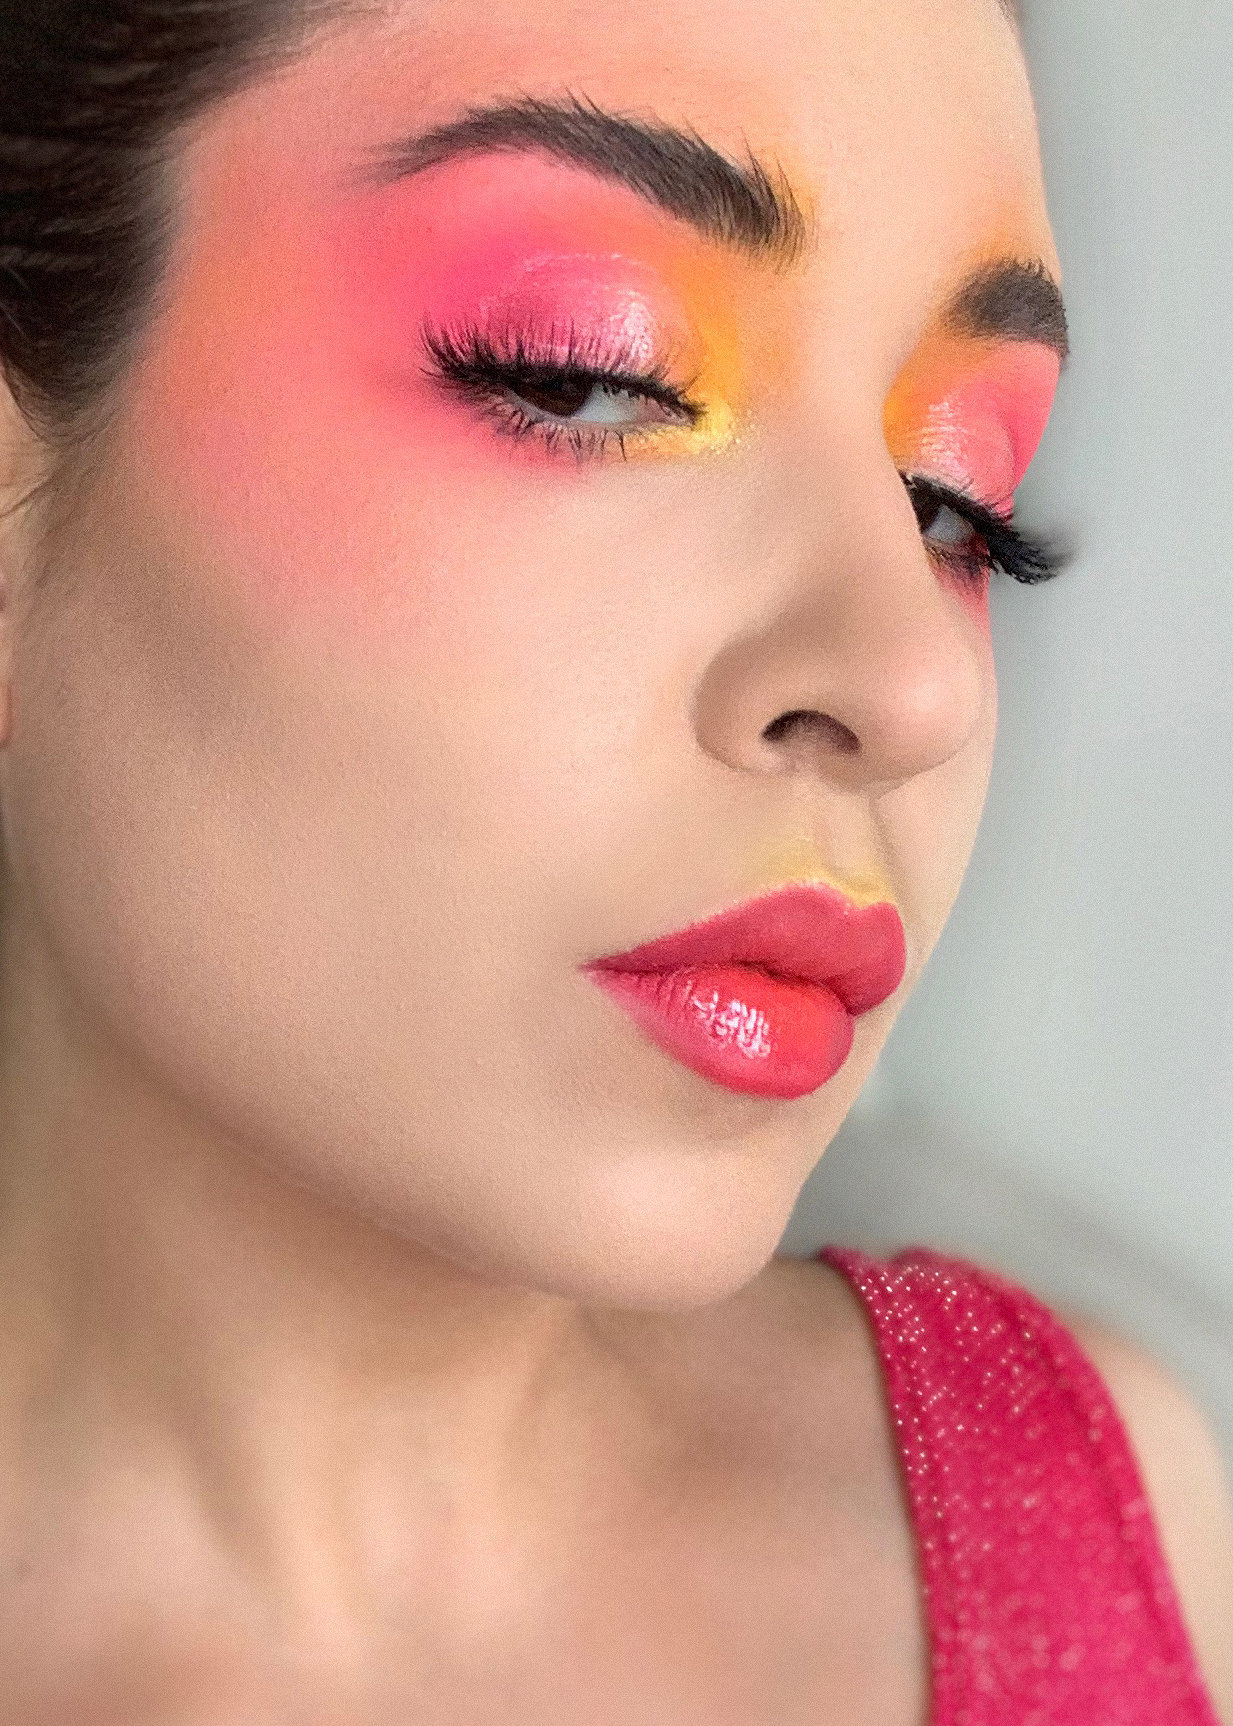 How to Do the Neon Makeup Trend